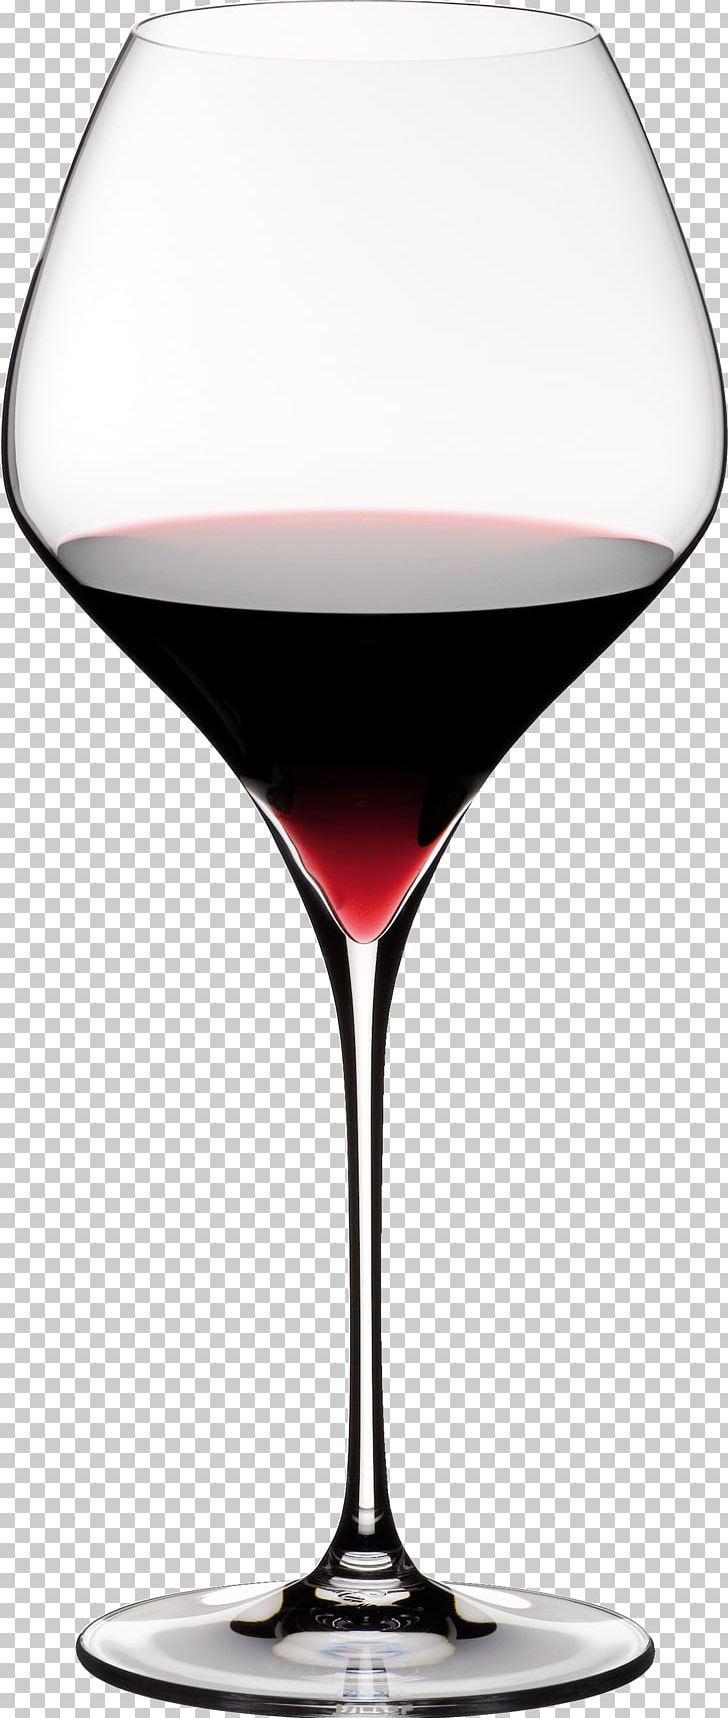 Pinot Noir Wine Glass Shiraz Riedel PNG, Clipart, Barware, Champagne Stemware, Cocktail, Cocktail Glass, Drink Free PNG Download